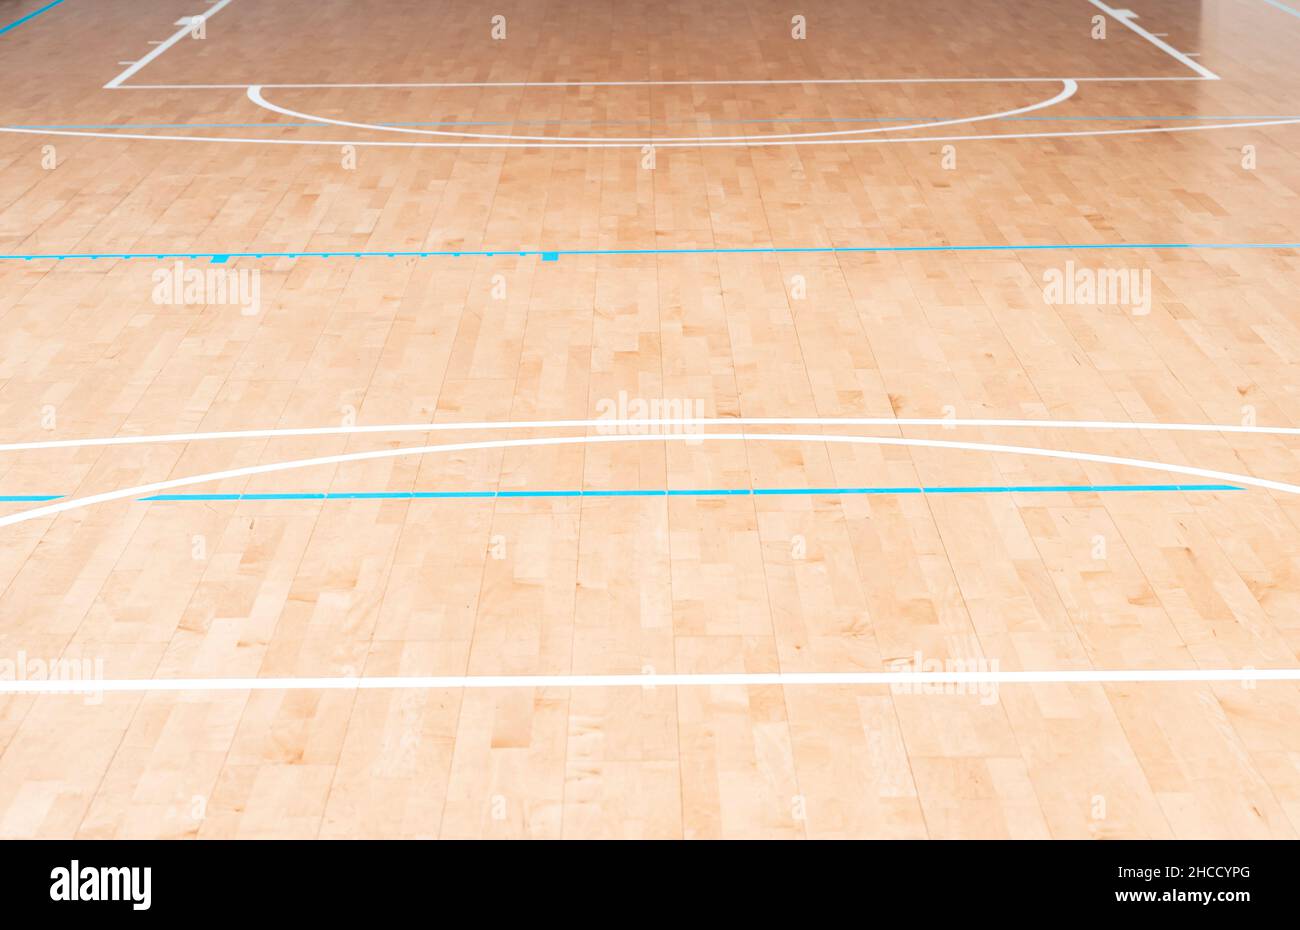 Wooden floor  basketball, badminton, futsal, handball, volleyball, football, soccer court. Wooden floor of sports hall with marking blue and white lin Stock Photo